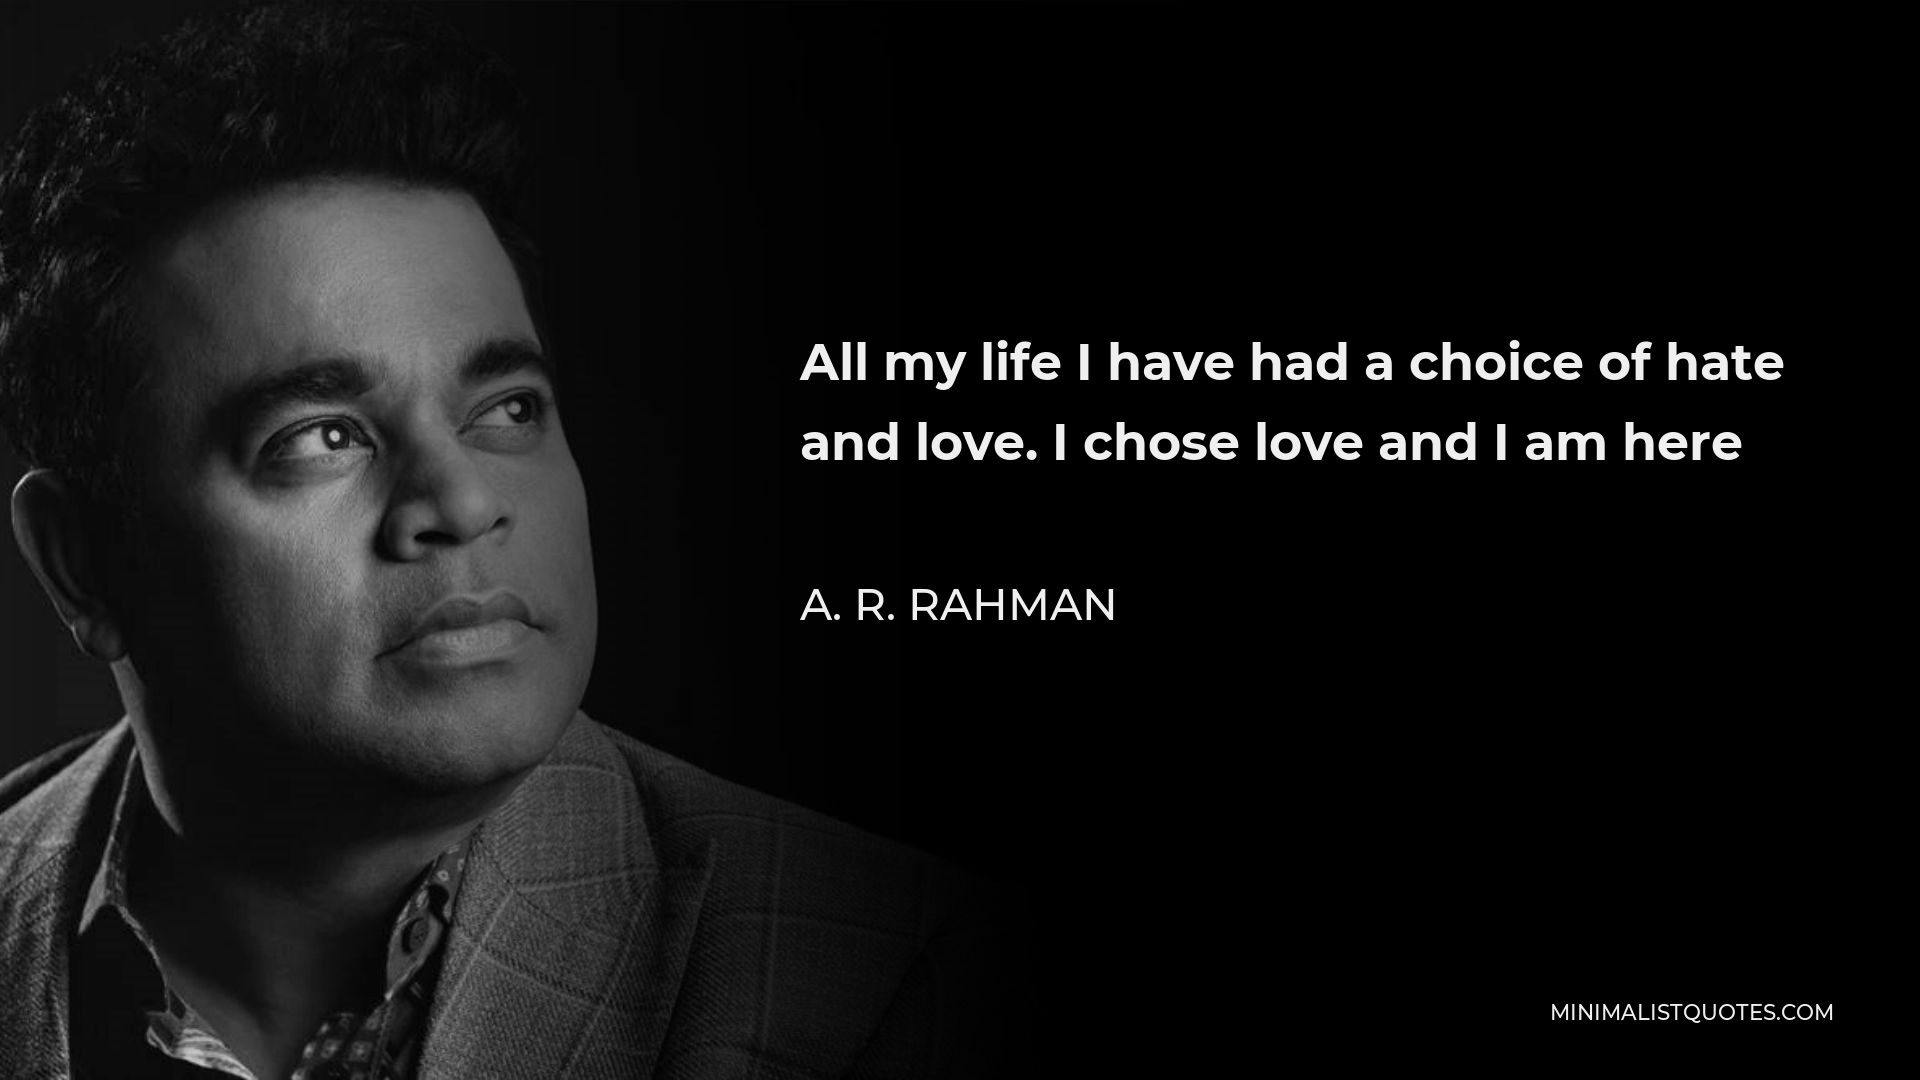 A. R. Rahman Quote - All my life I have had a choice of hate and love. I chose love and I am here